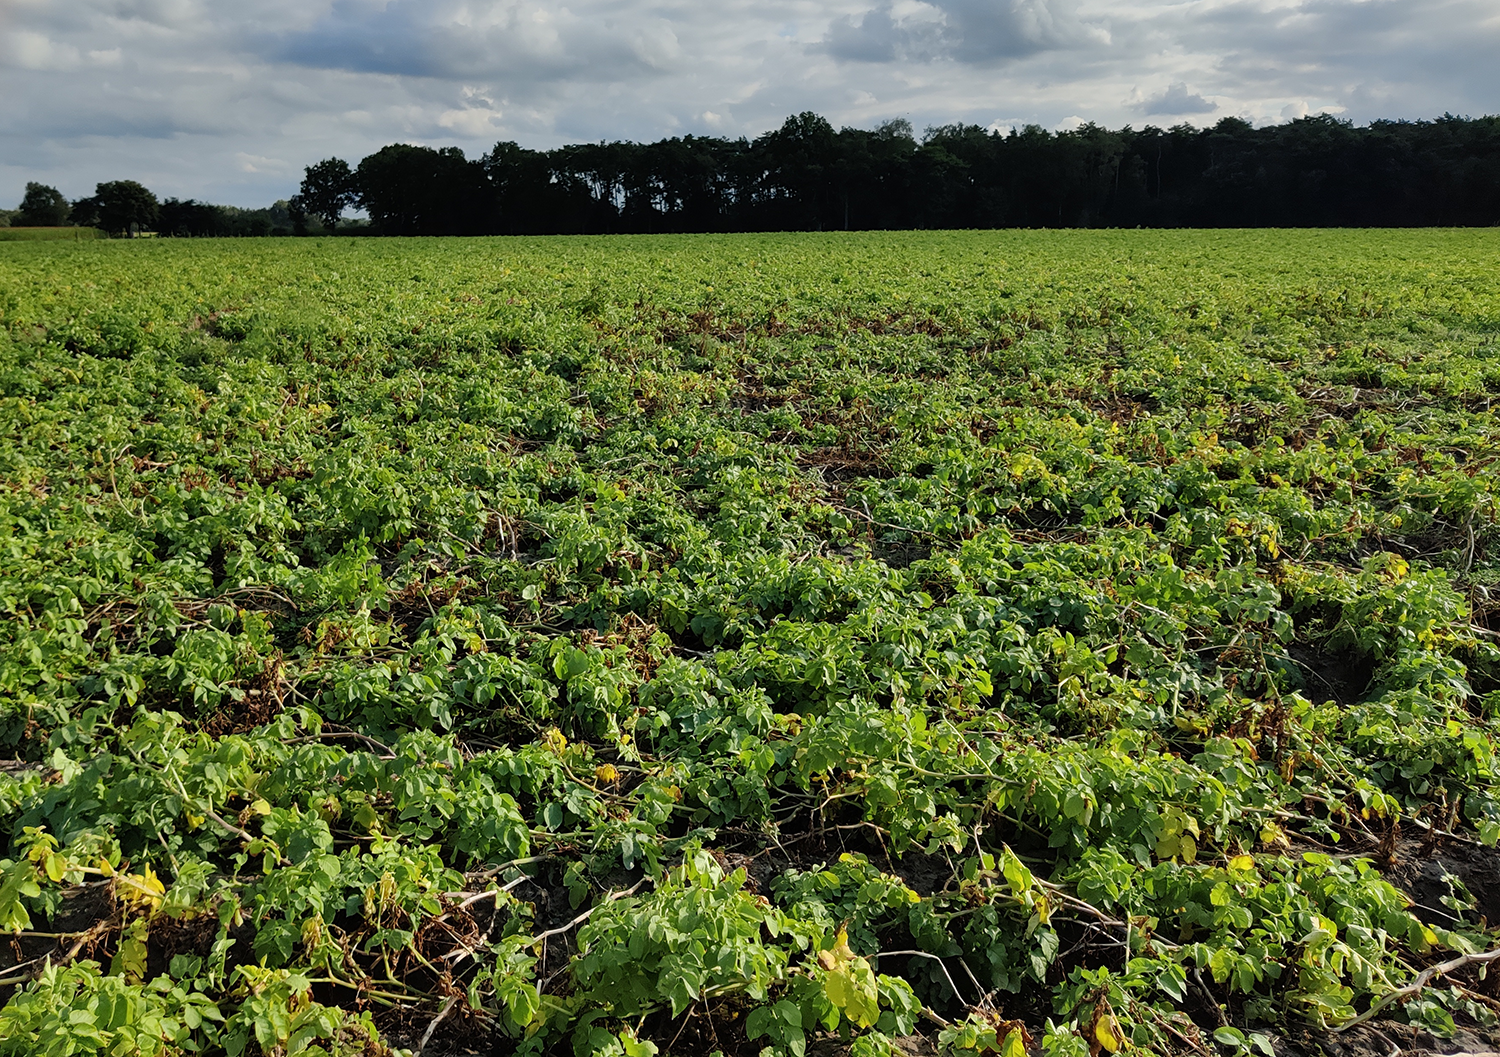 The impact of extreme weather on the cultivation of potatoes